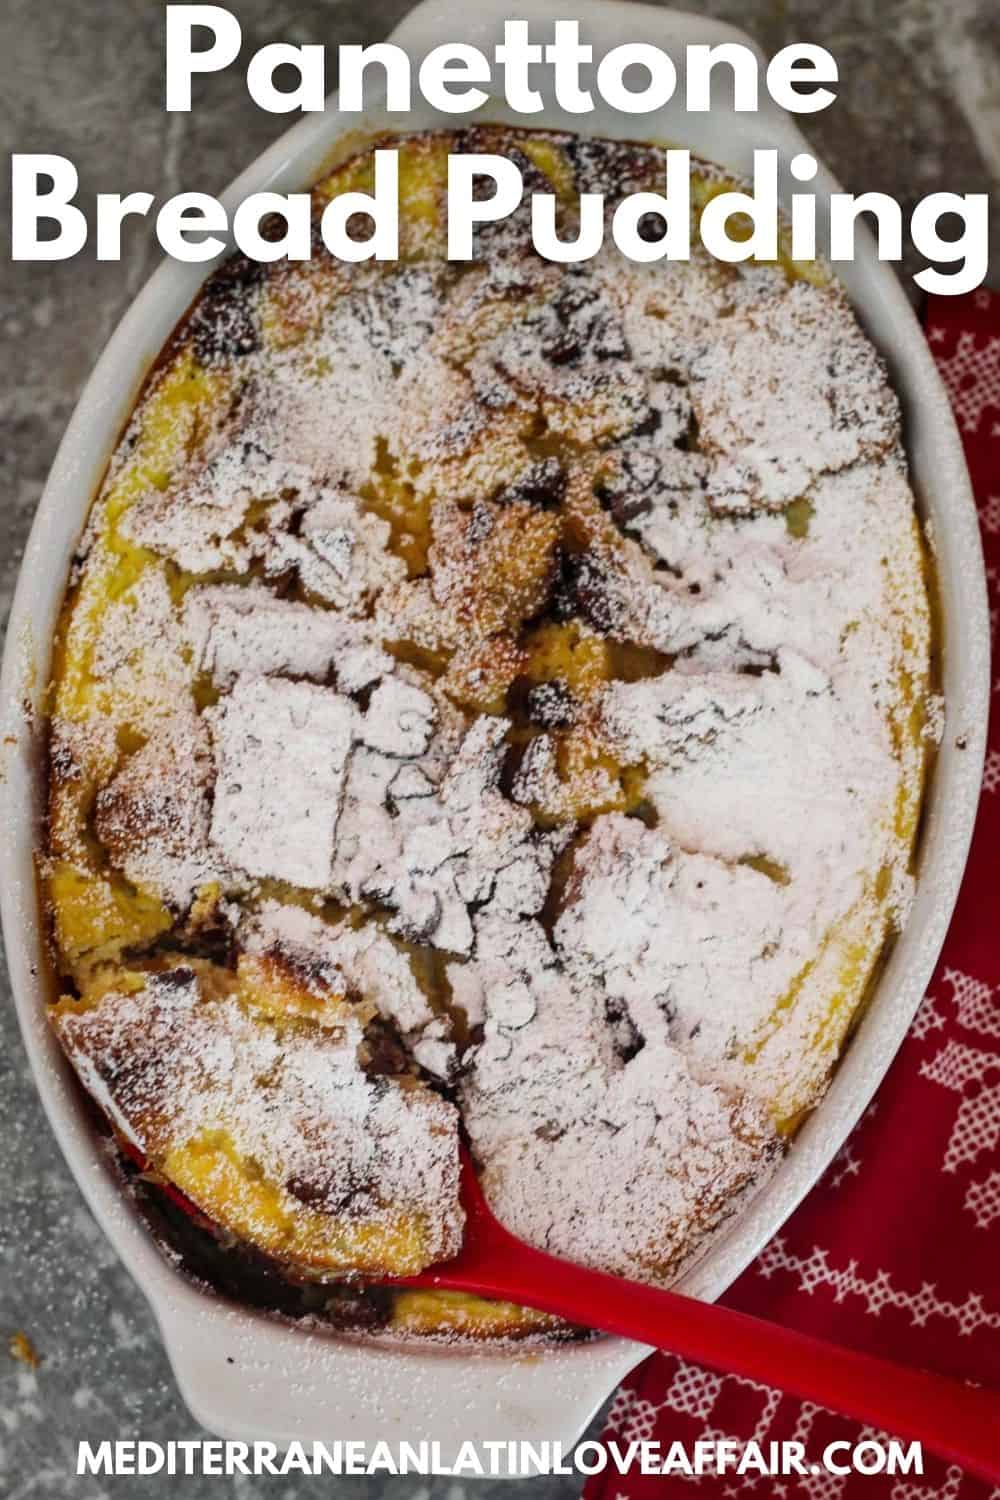 An image prepared specifically for Pinterest. It shows the baked Panettone bread pudding in a white oval dish. Pudding is covered in confectioner's sugar and there's a serving ladle cutting through for a serving. There's a title bar over the image and a website link in the bottom. 